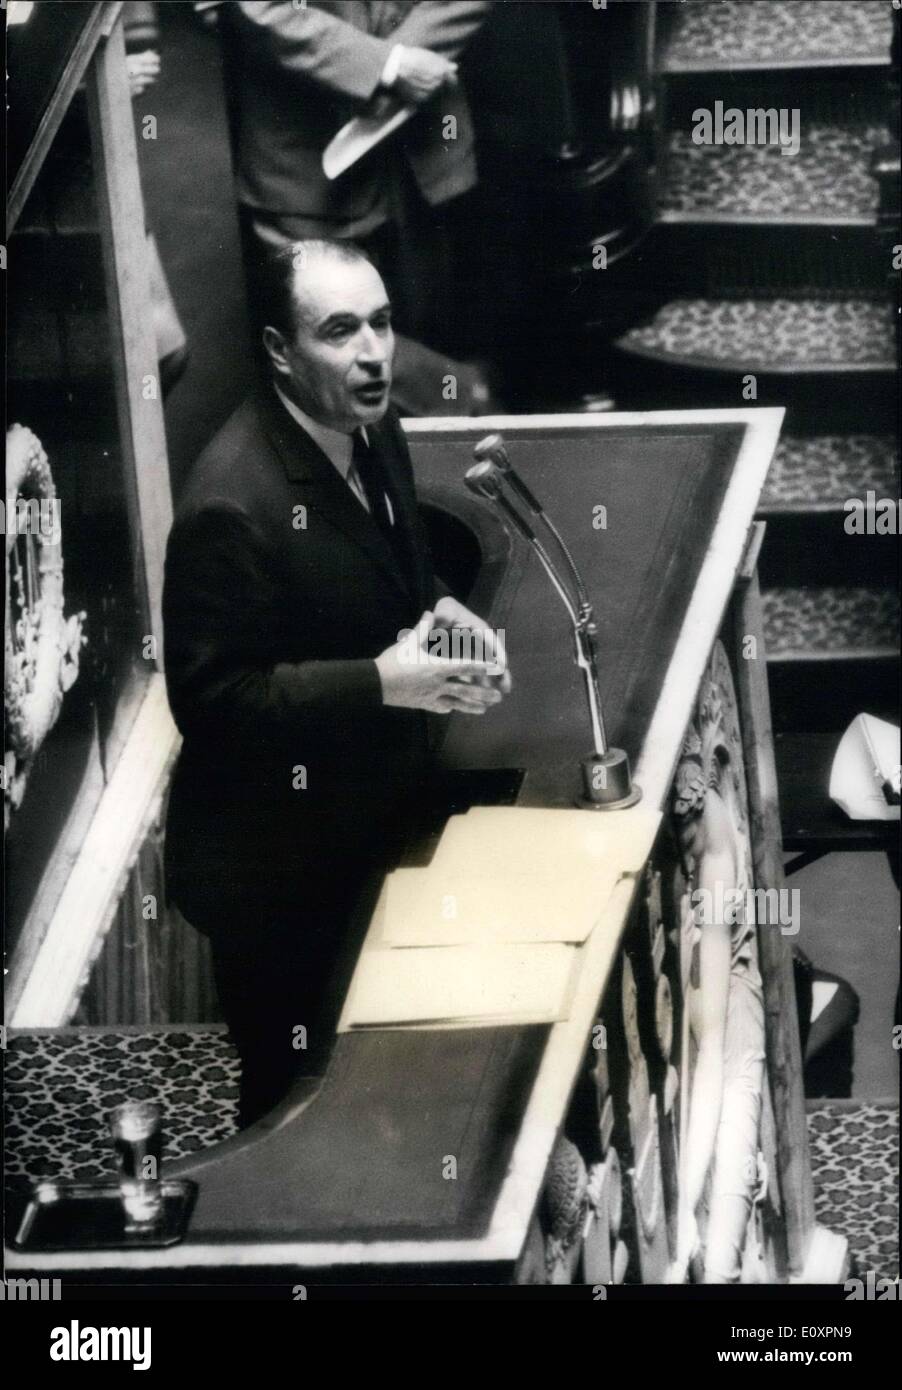 Oct. 10, 1967 - Opposition leader V. Government at French Assembly: The first parliamentary debate over the new economic and social measures announced by the French government took place at the National Assembly today. Photo shows Francois Mitterand, leaders of the leftist opposition pictured in the assembly Rostrum today. Stock Photo